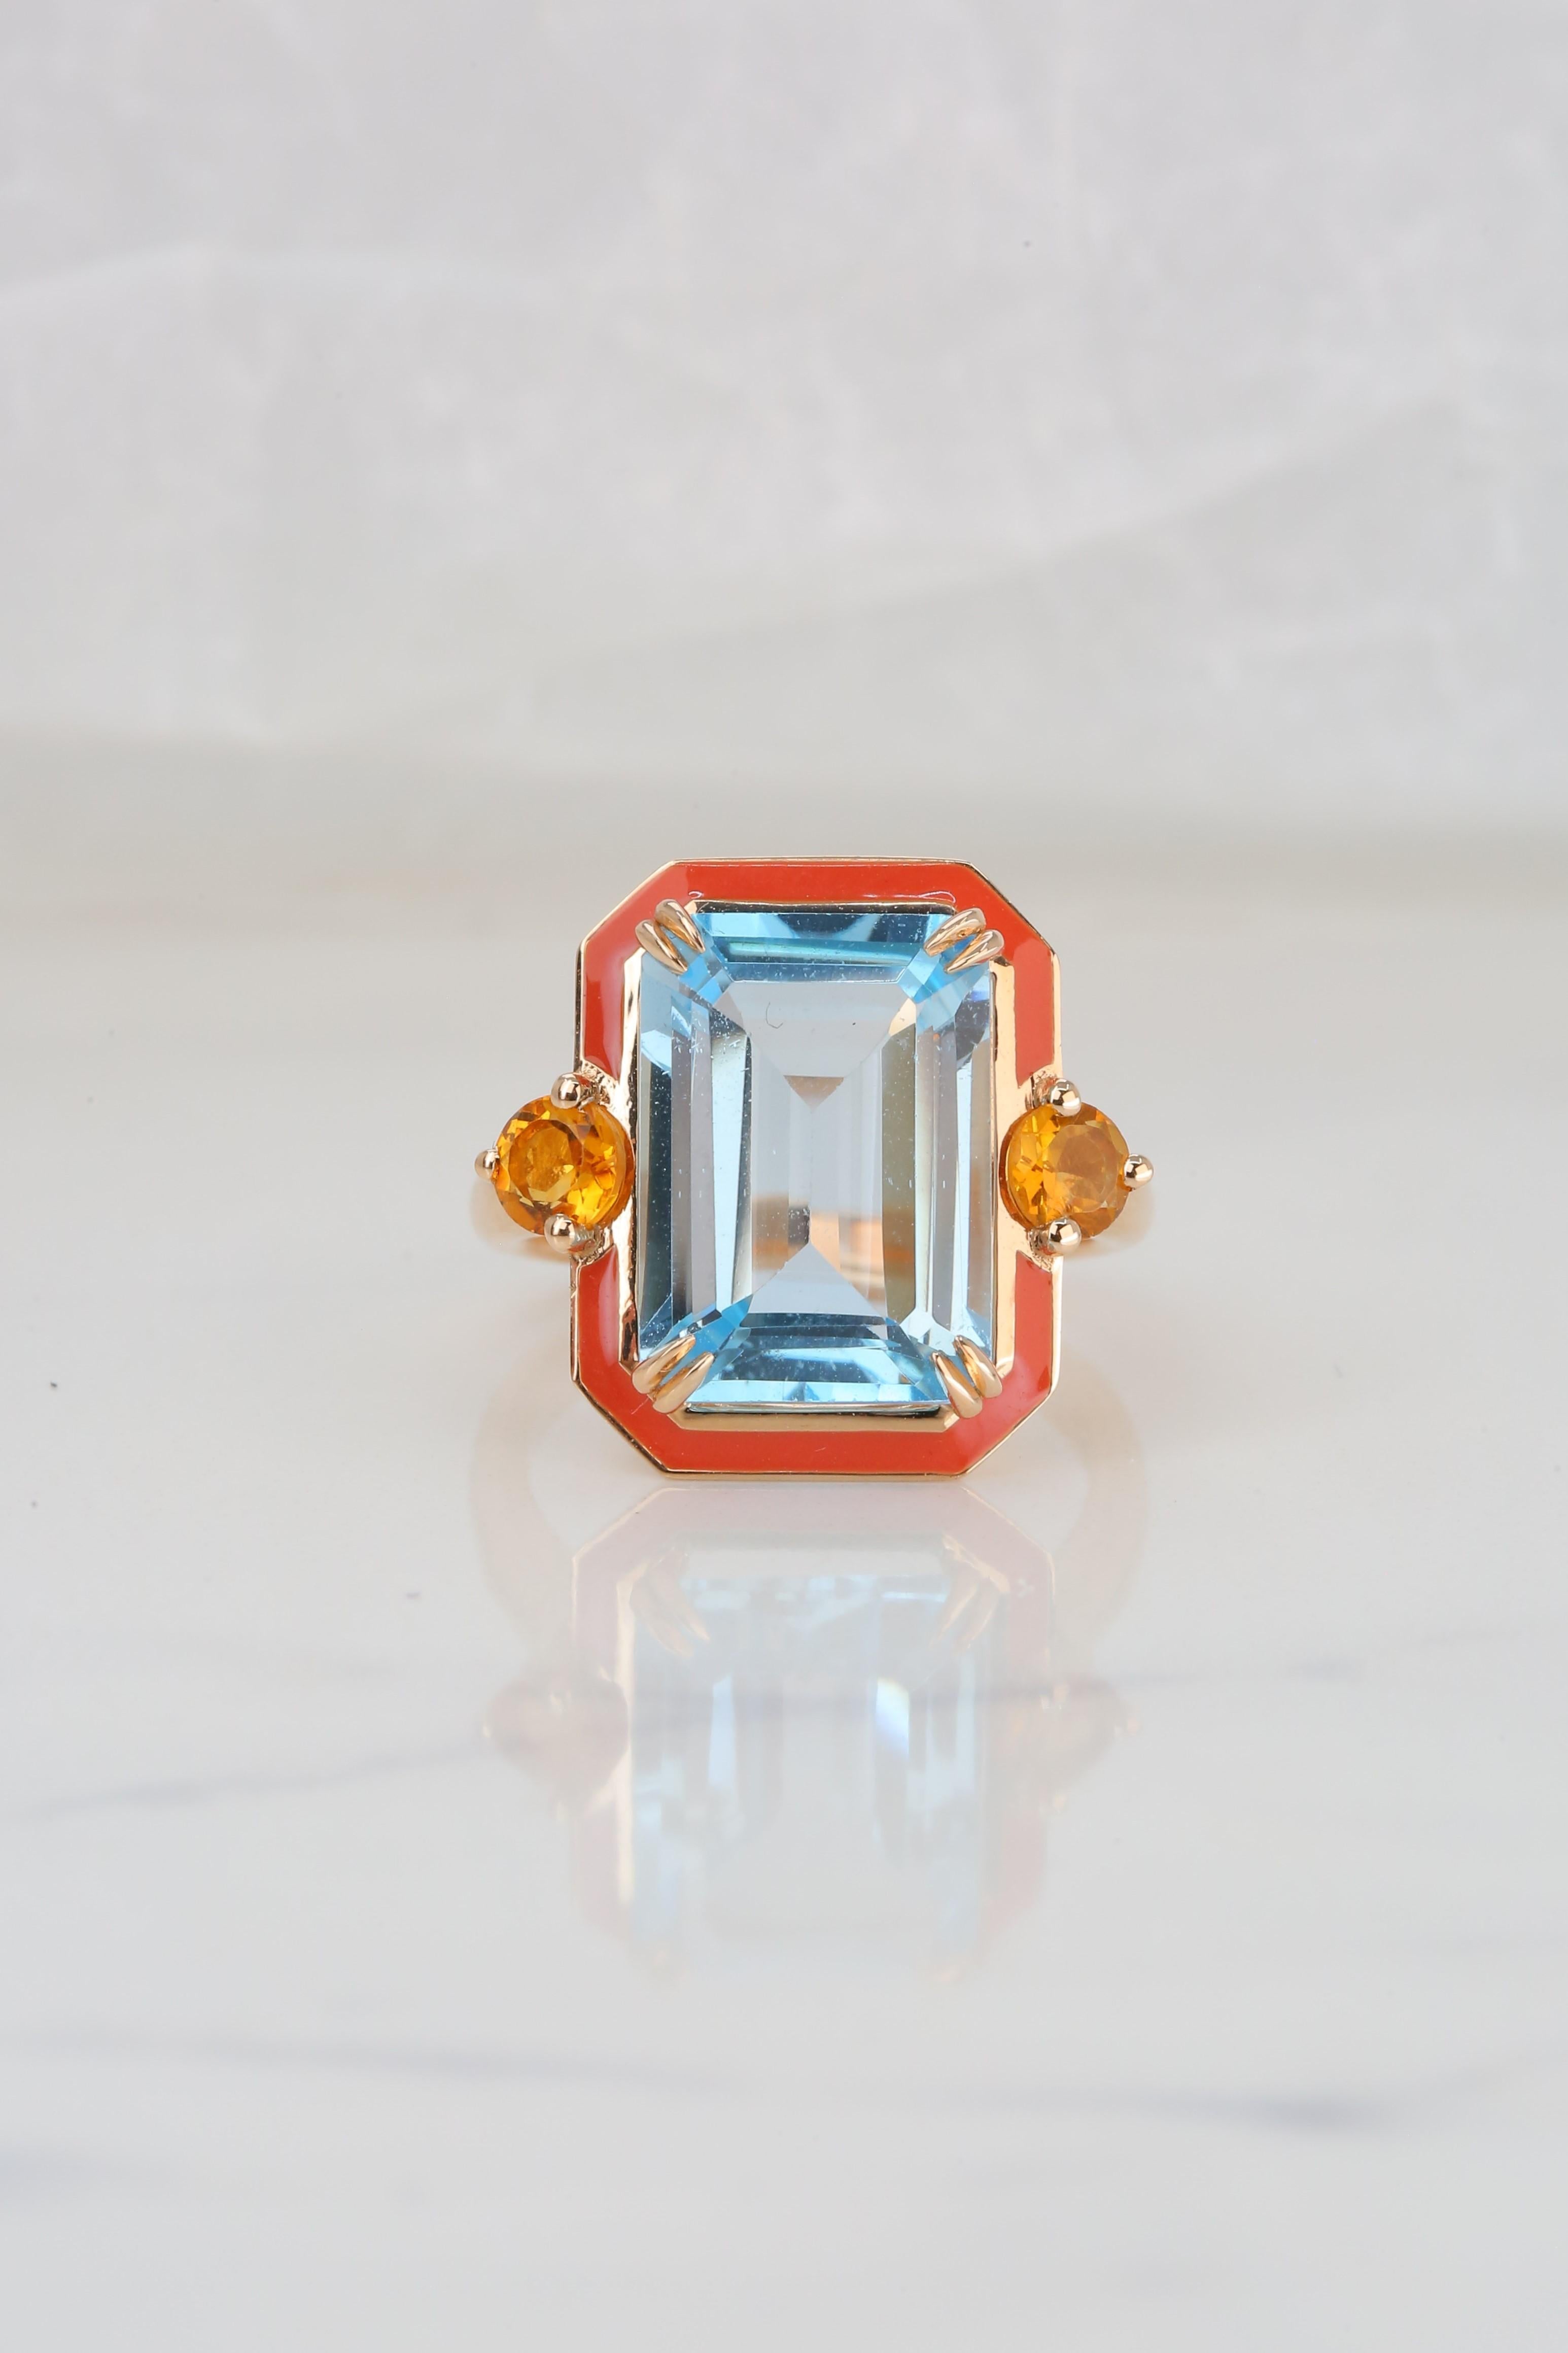 For Sale:  14K Gold Artdeco Style Enameled Cocktail Ring with 5.68 Ct Sky Topaz and Citrine 8